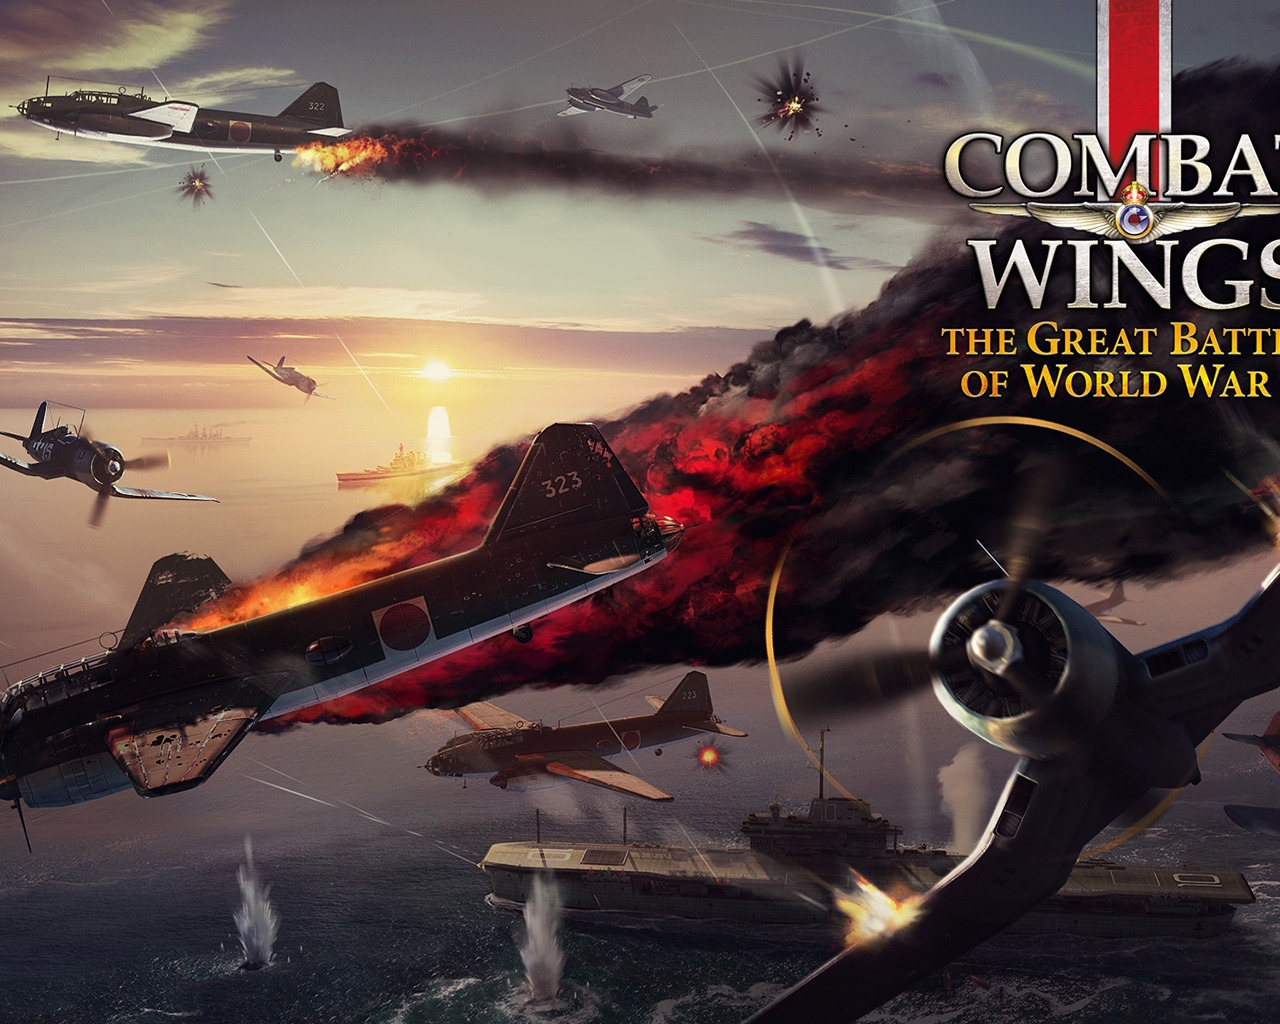 Combat Wings for 1280 x 1024 resolution